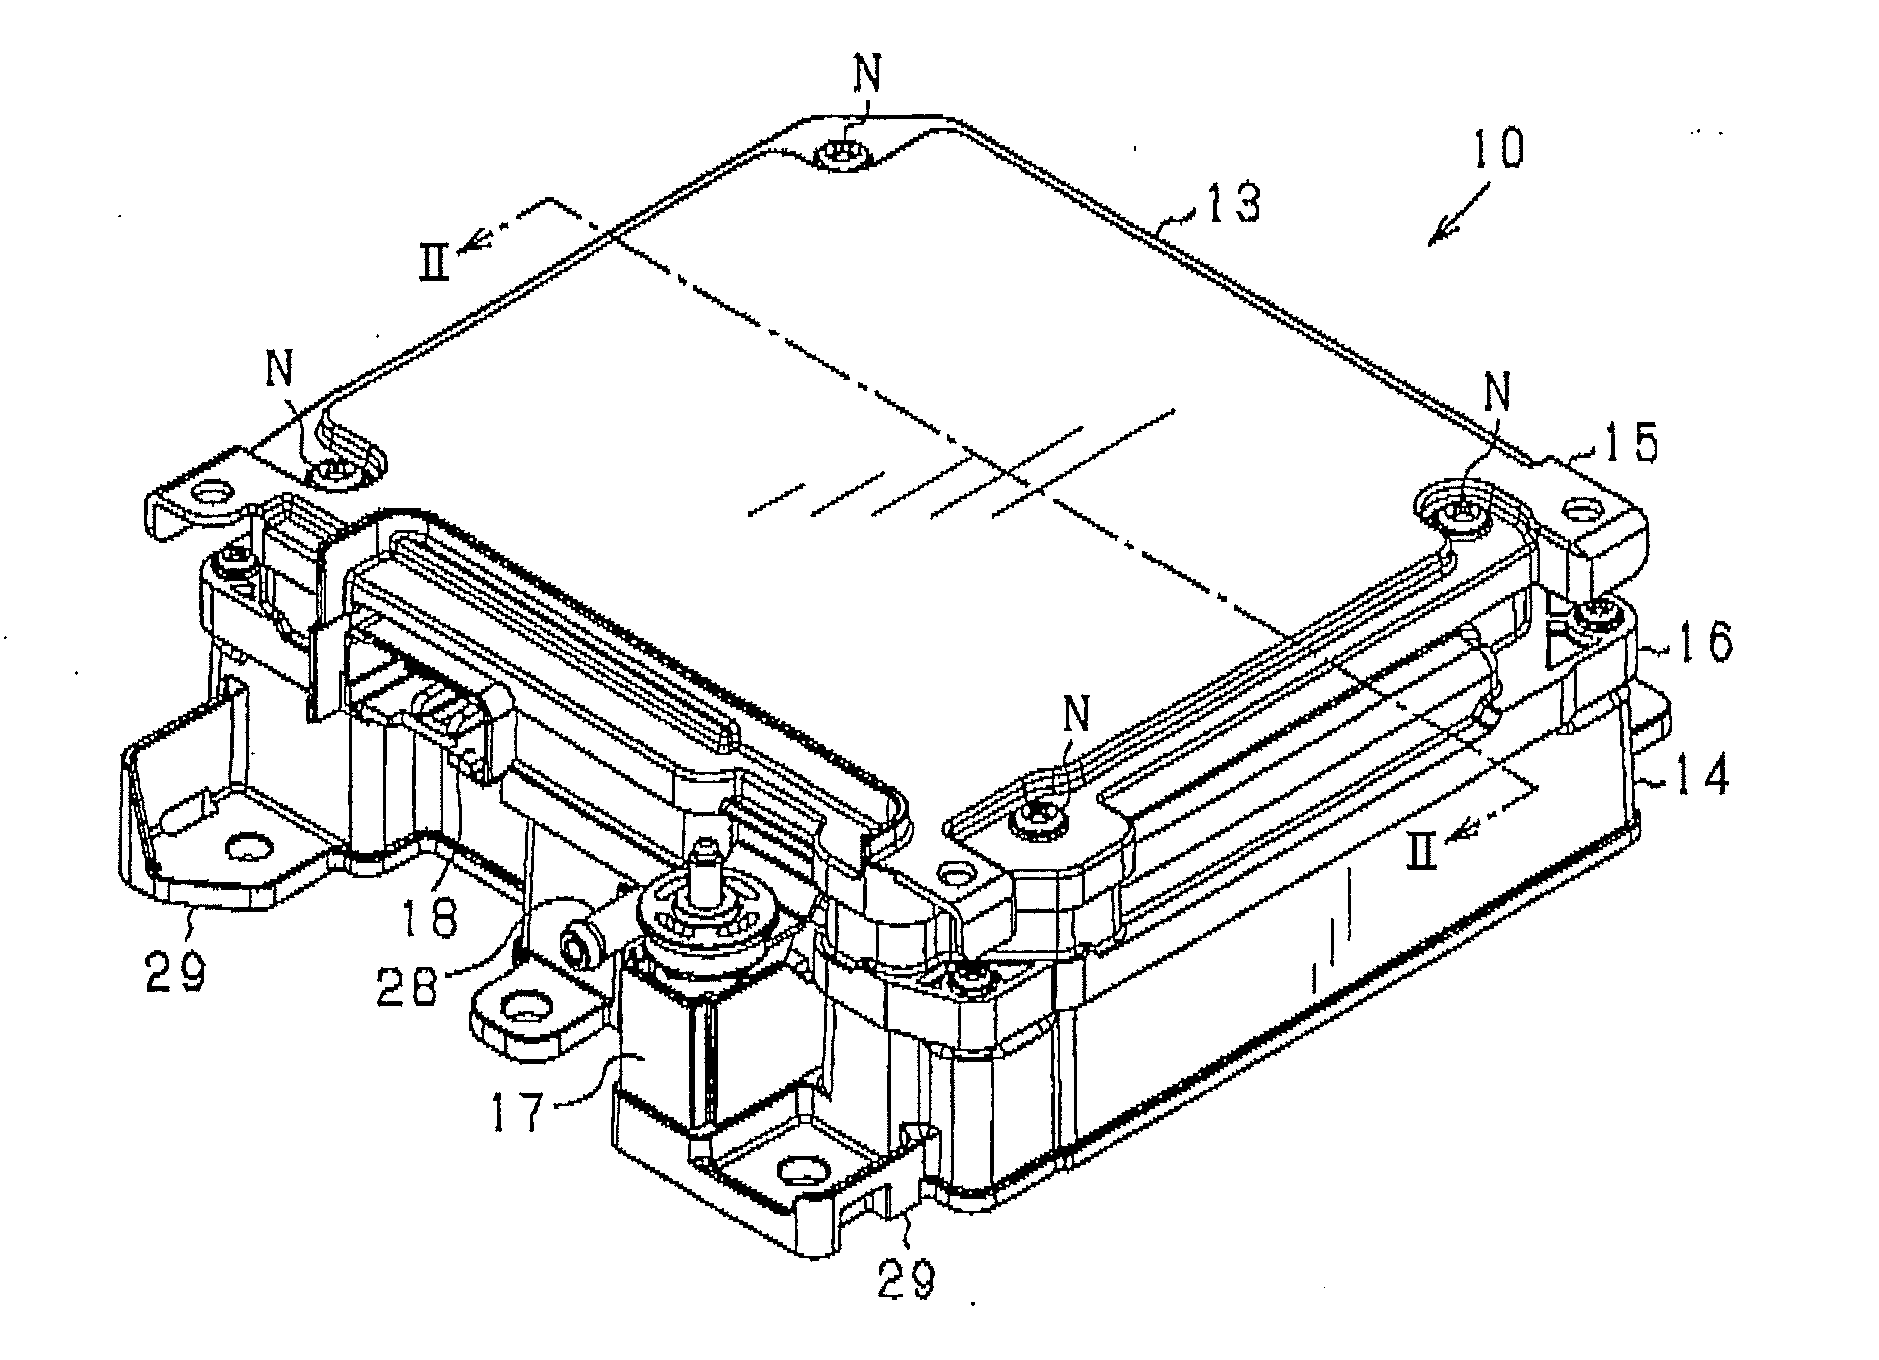 Structure of battery unit suitable for installation of water damage sensor